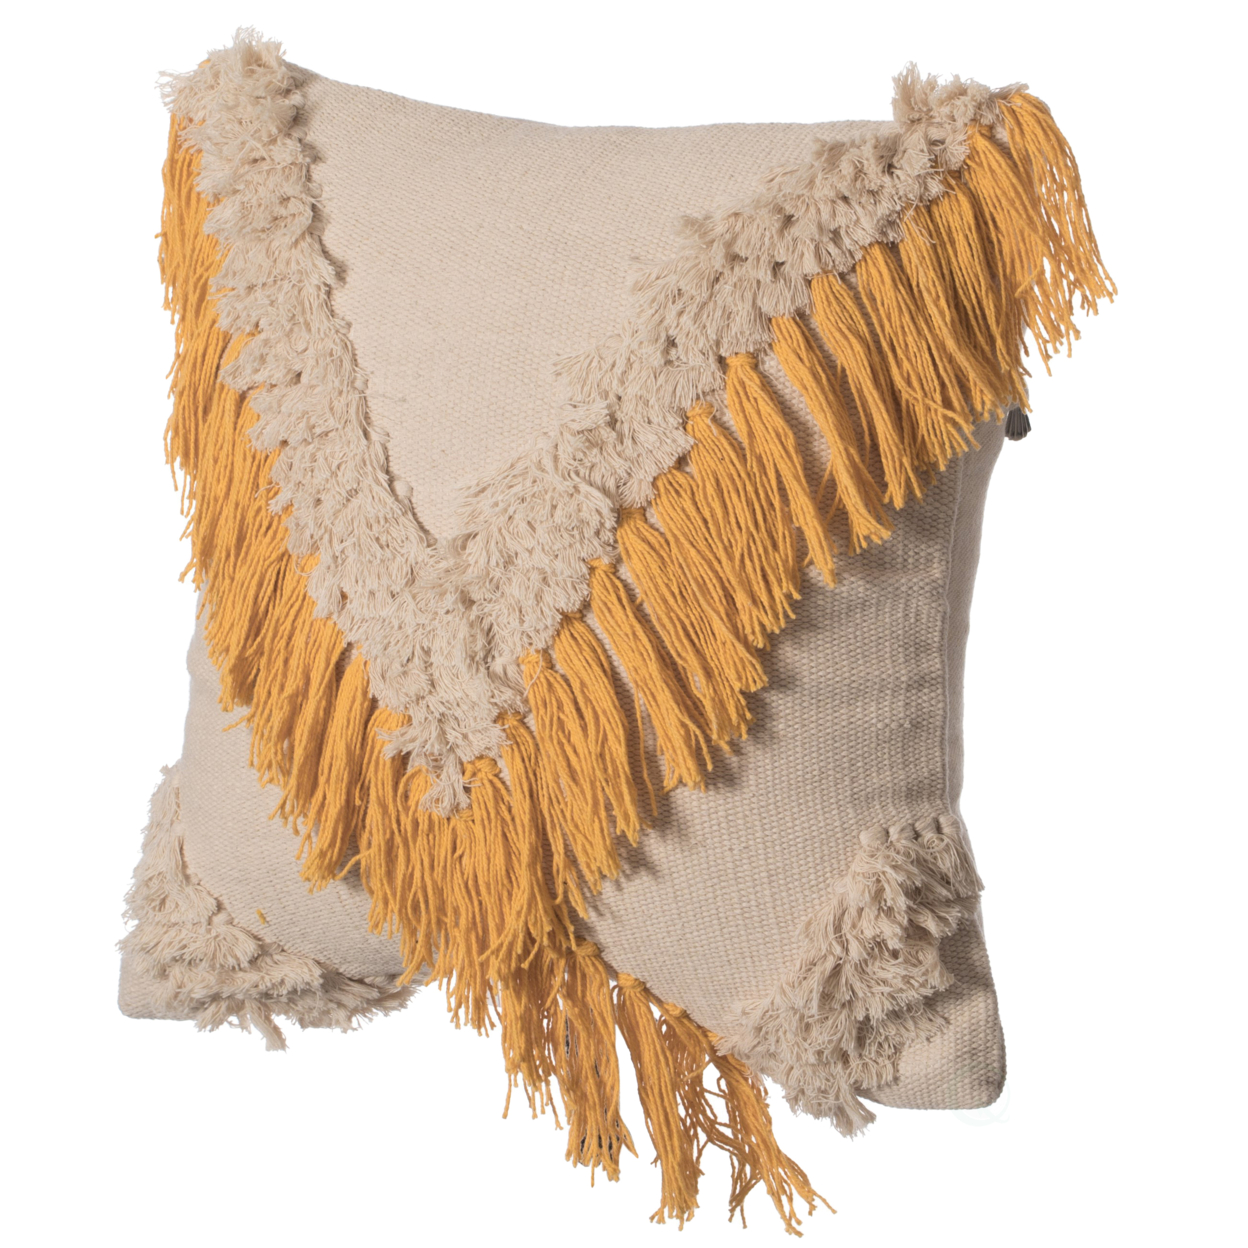 16" Handwoven Cotton Throw Pillow Cover with Embossed and Fringed Crossed line - yellow with cushion